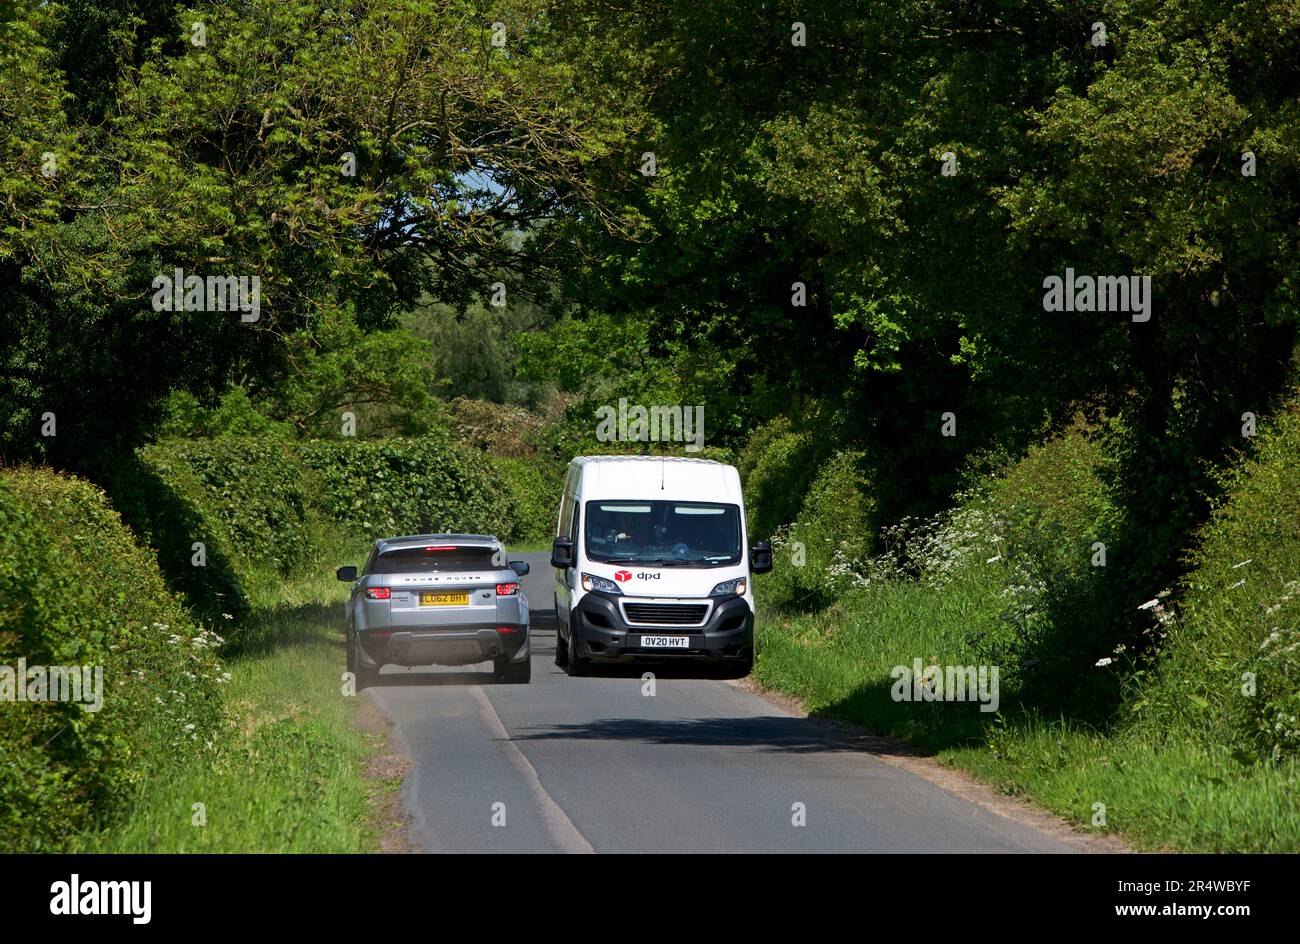 Range Rover passing DPD delivery van on single track Breighton Road, East Yorkshire, England UK Stock Photo